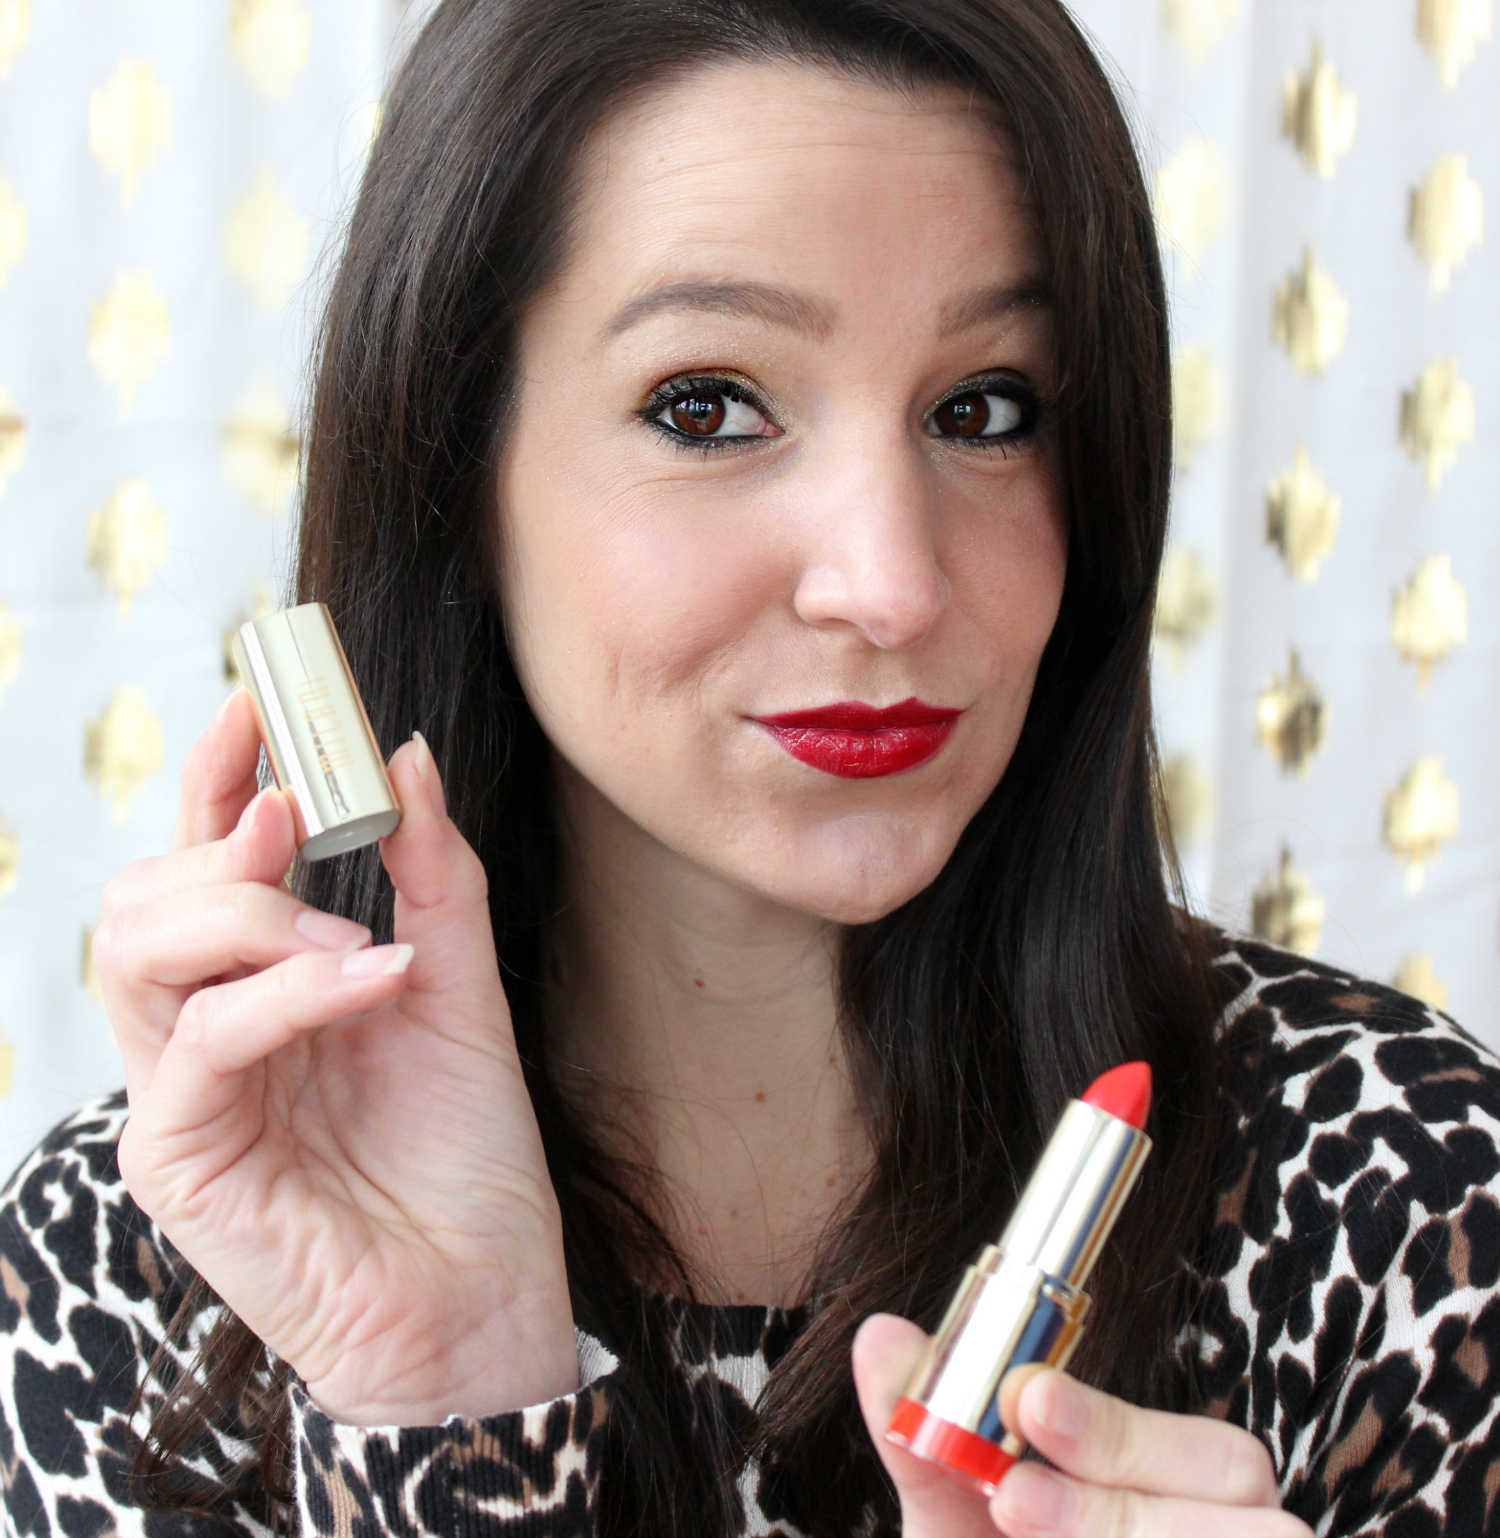 A fun and simple New Year's Eve makeup tutorial featuring affordable drugstore products